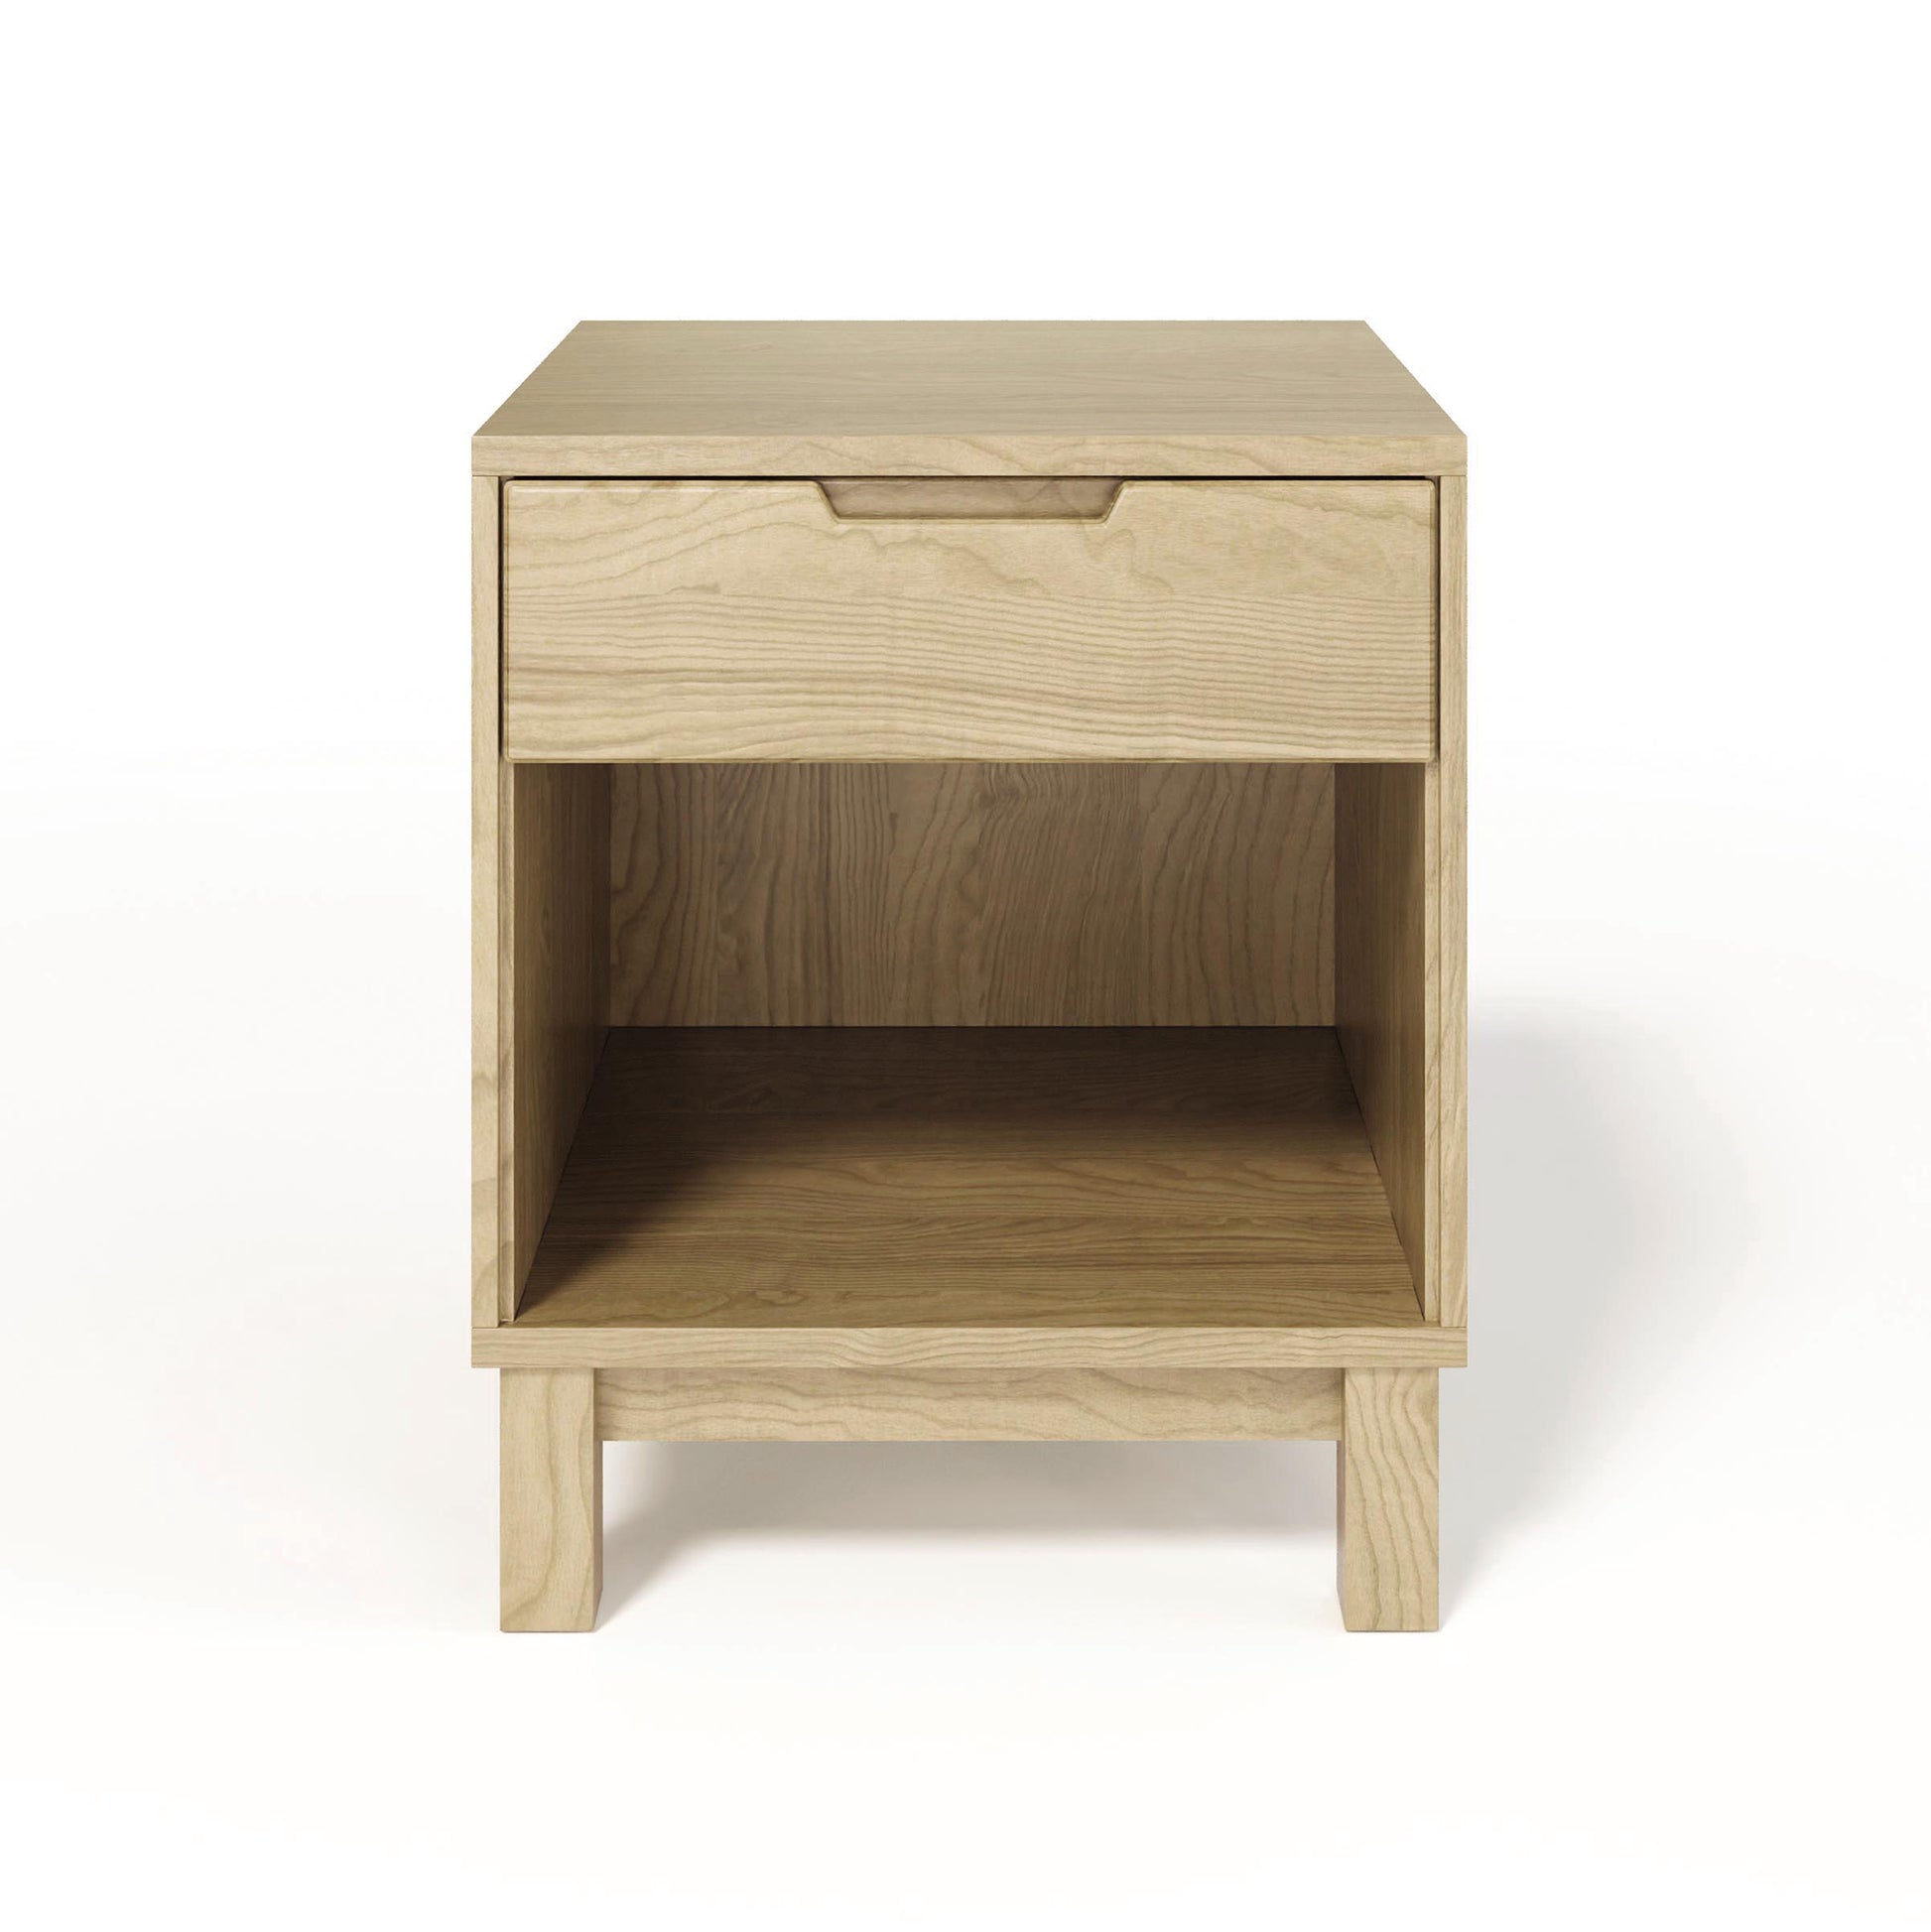 The Oslo 1-Drawer Enclosed Shelf Nightstand by Copeland Furniture is a small wooden nightstand with a drawer, featuring a sleek wood finish. It is crafted from solid oak hardwood, ensuring durability and longevity.